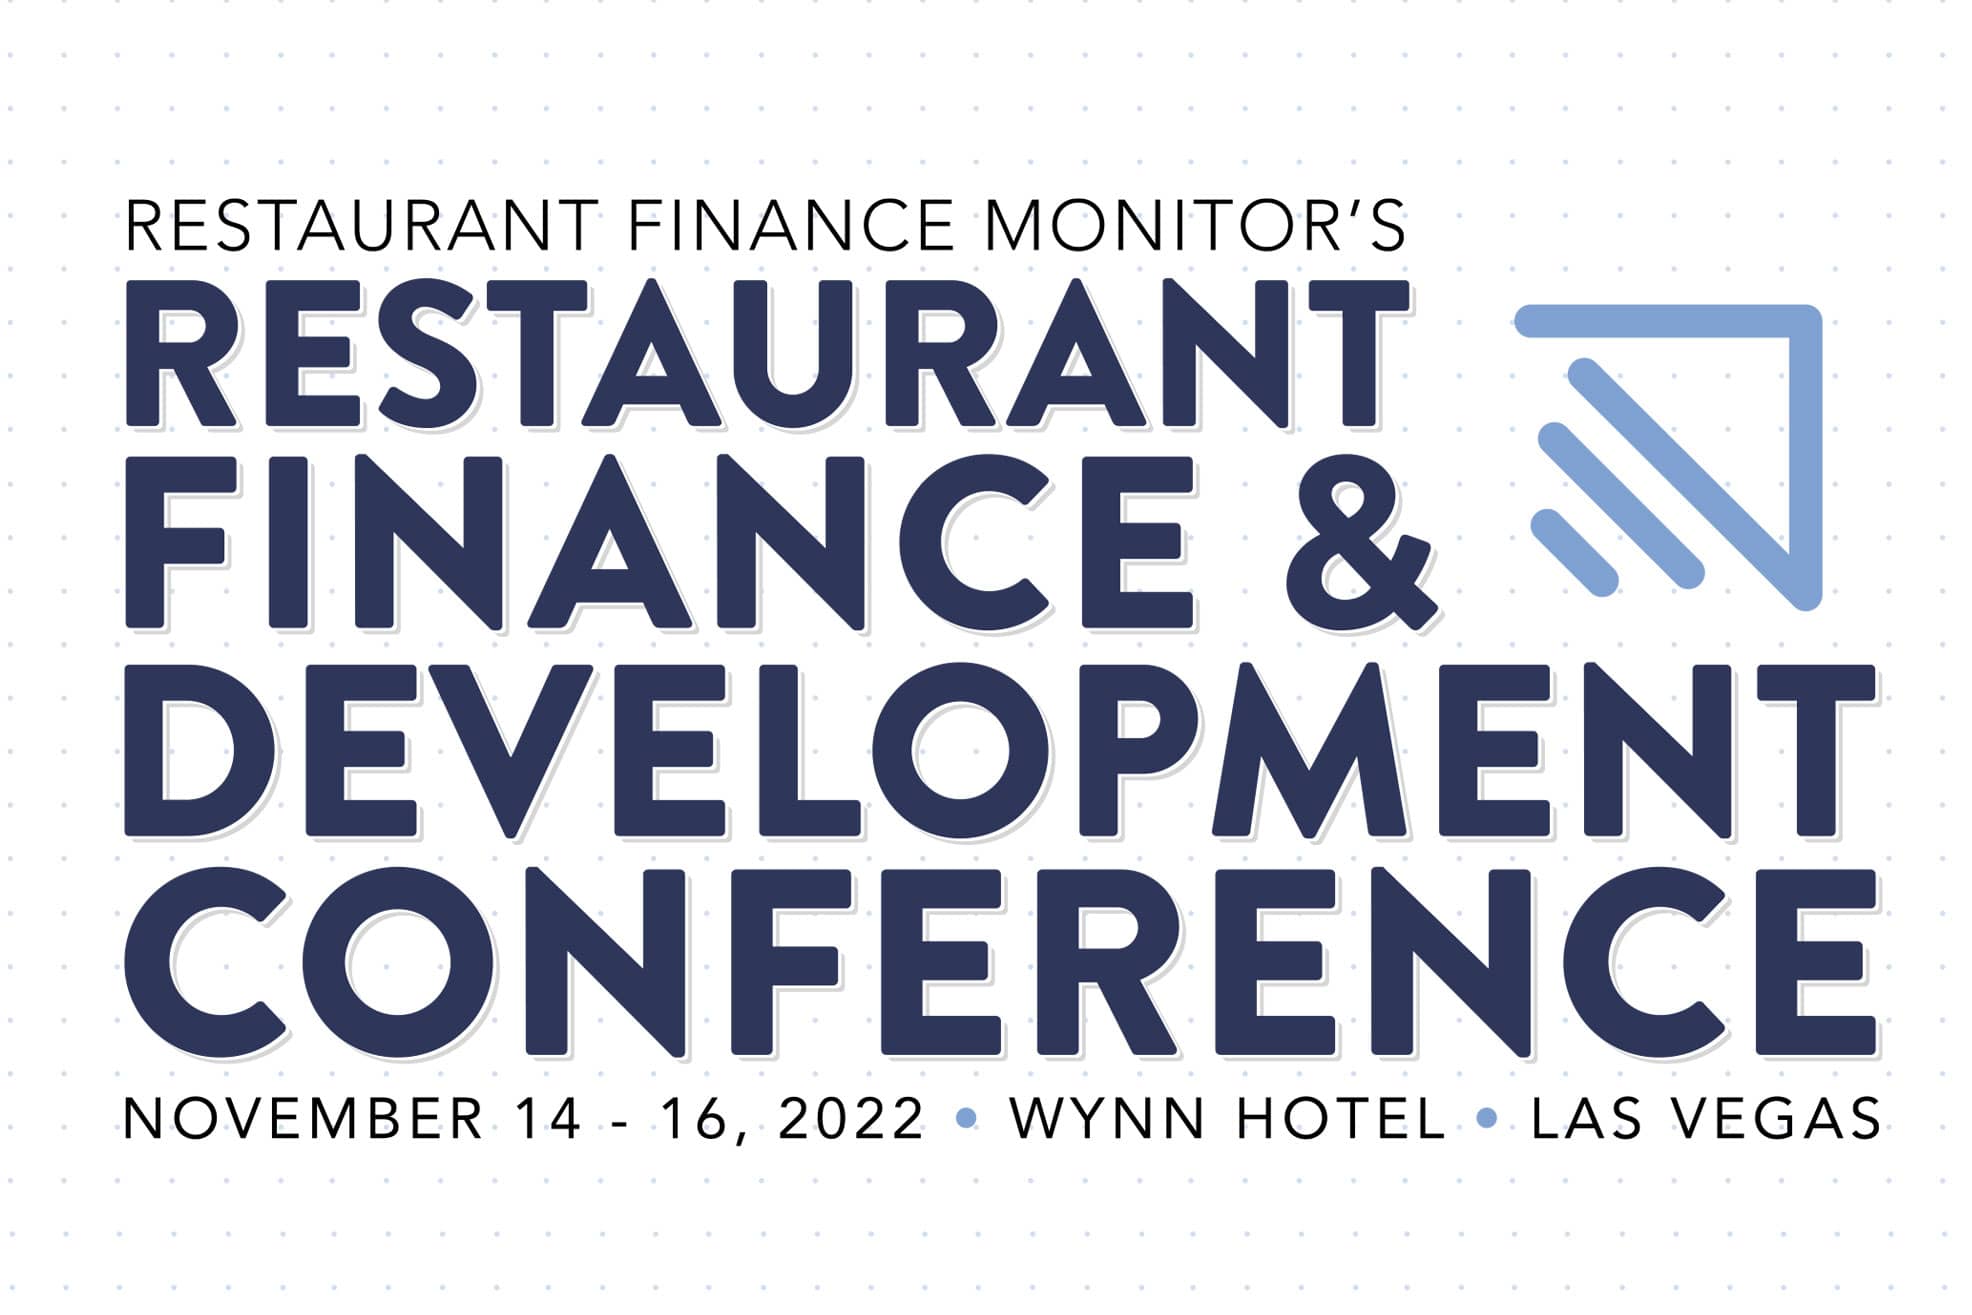 Restaurant finance monitor conference 2022